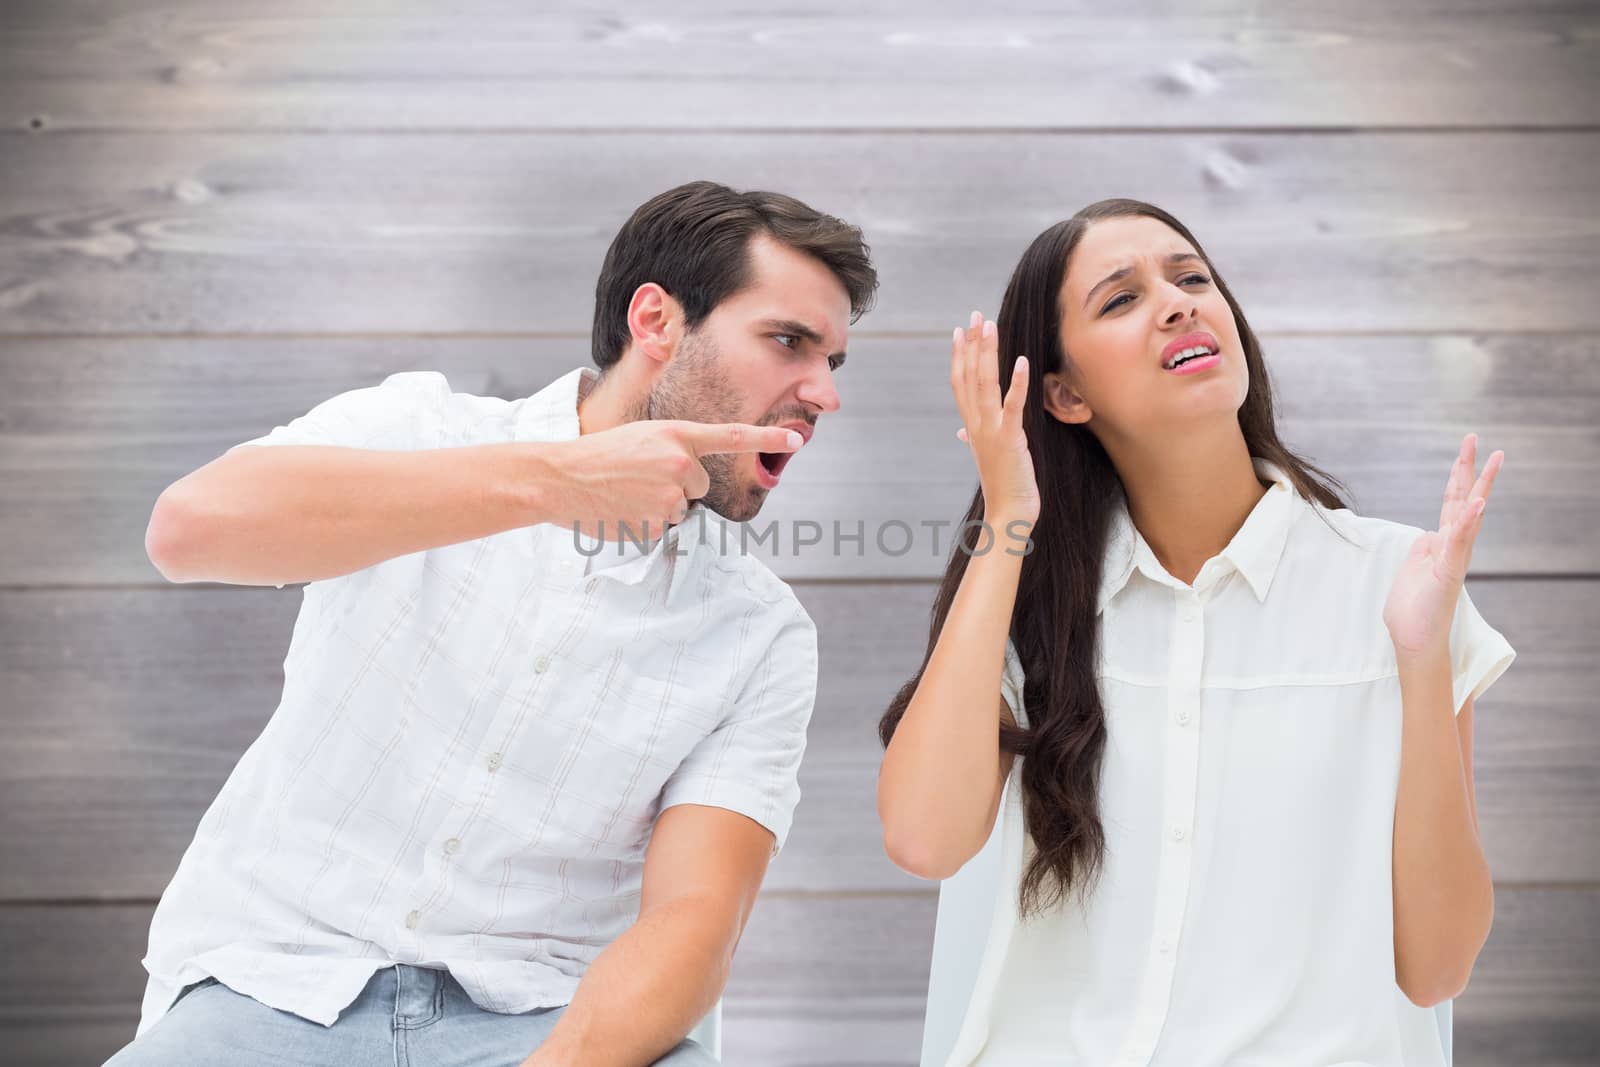 Couple sitting on chairs arguing against wooden planks background